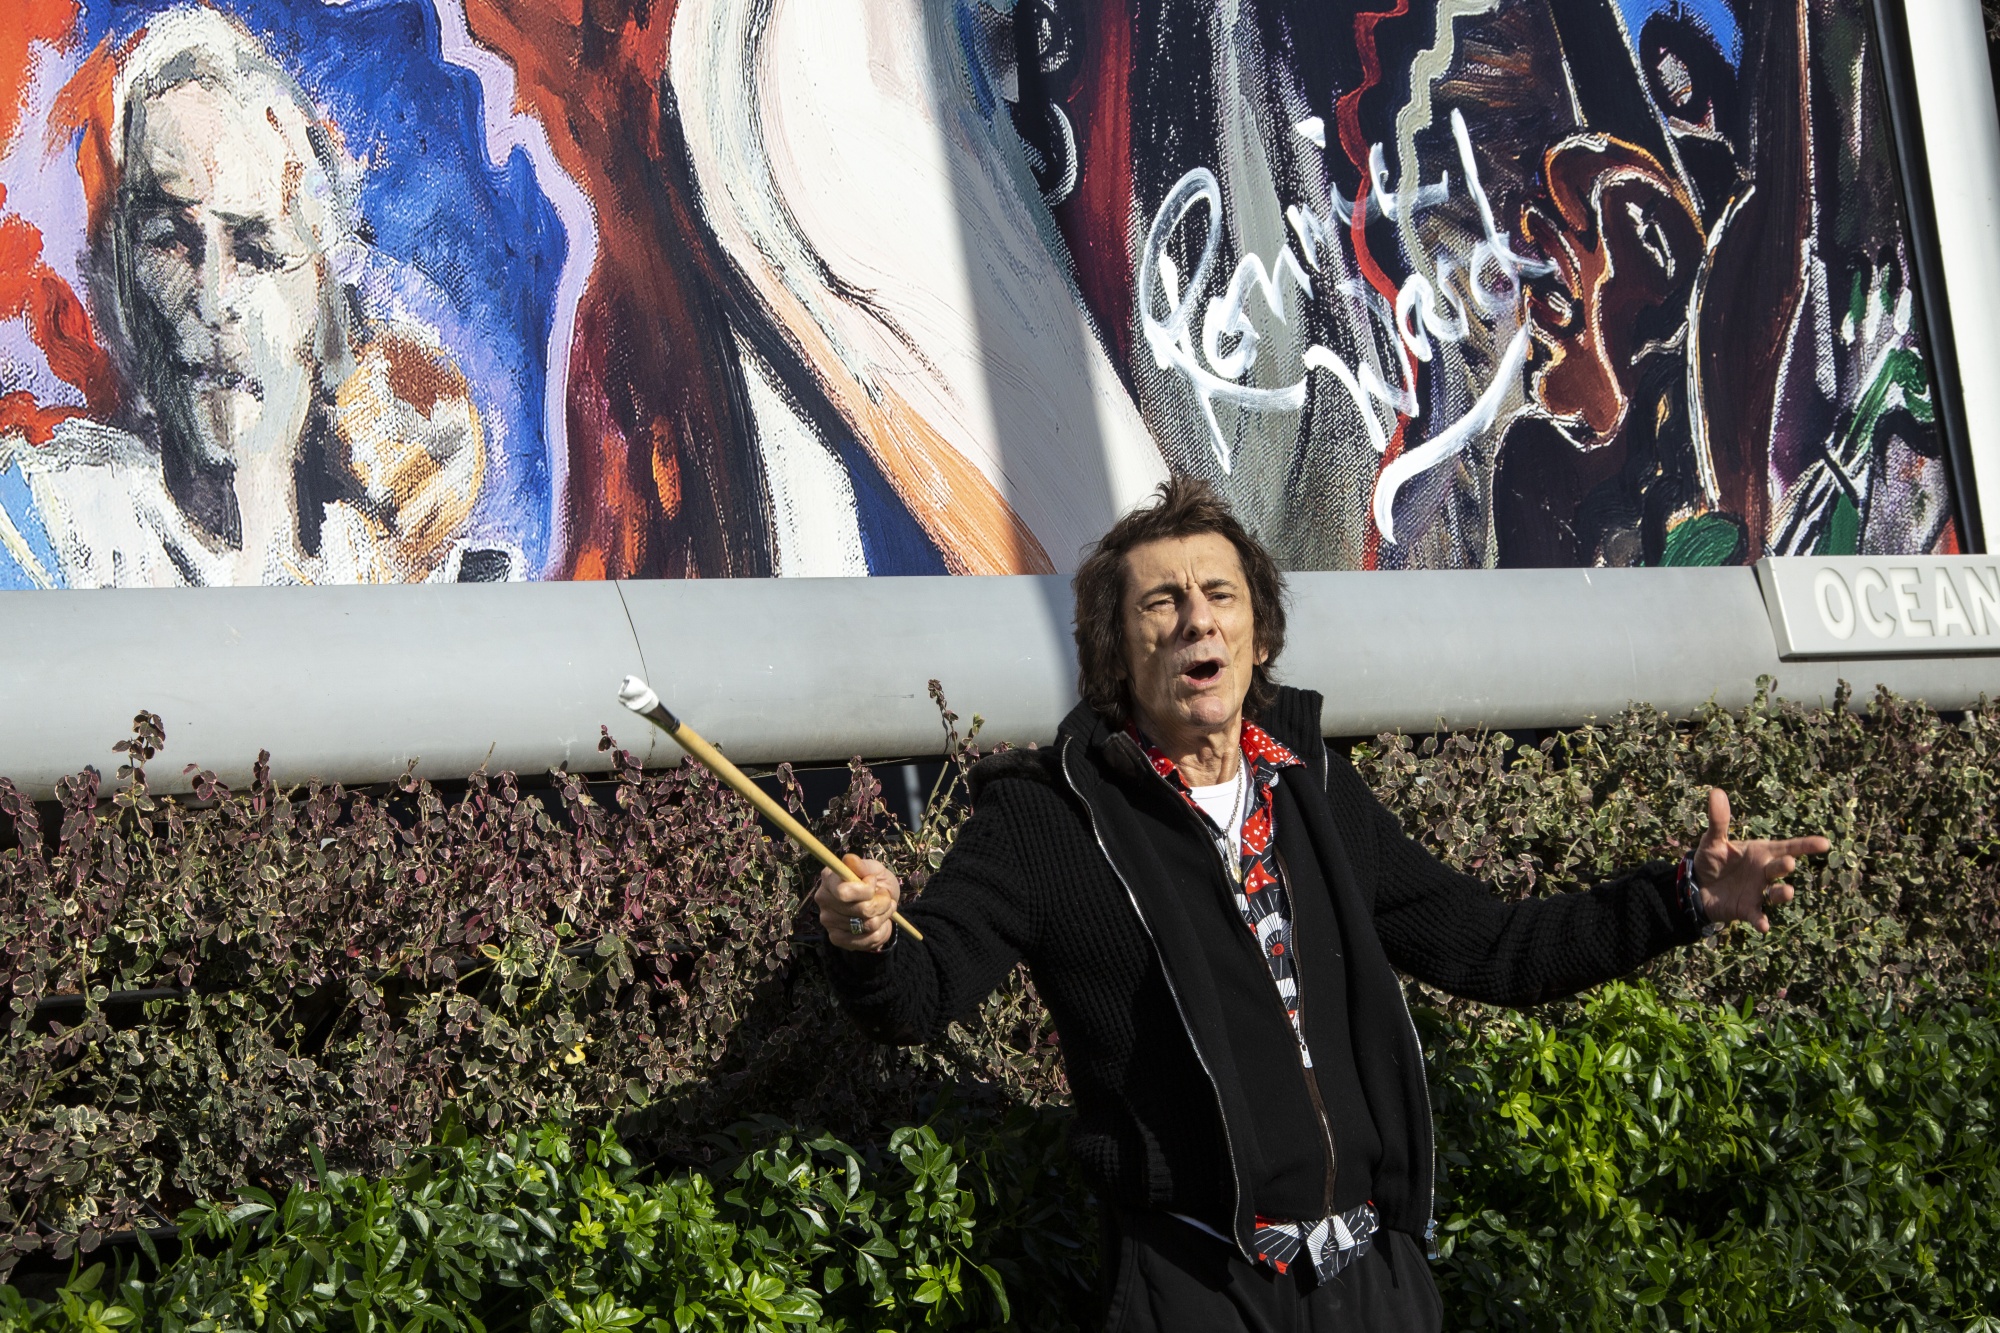 Ronnie Wood Unveils Rolling Stones Artwork, Talks Tour Hopes - Bloomberg